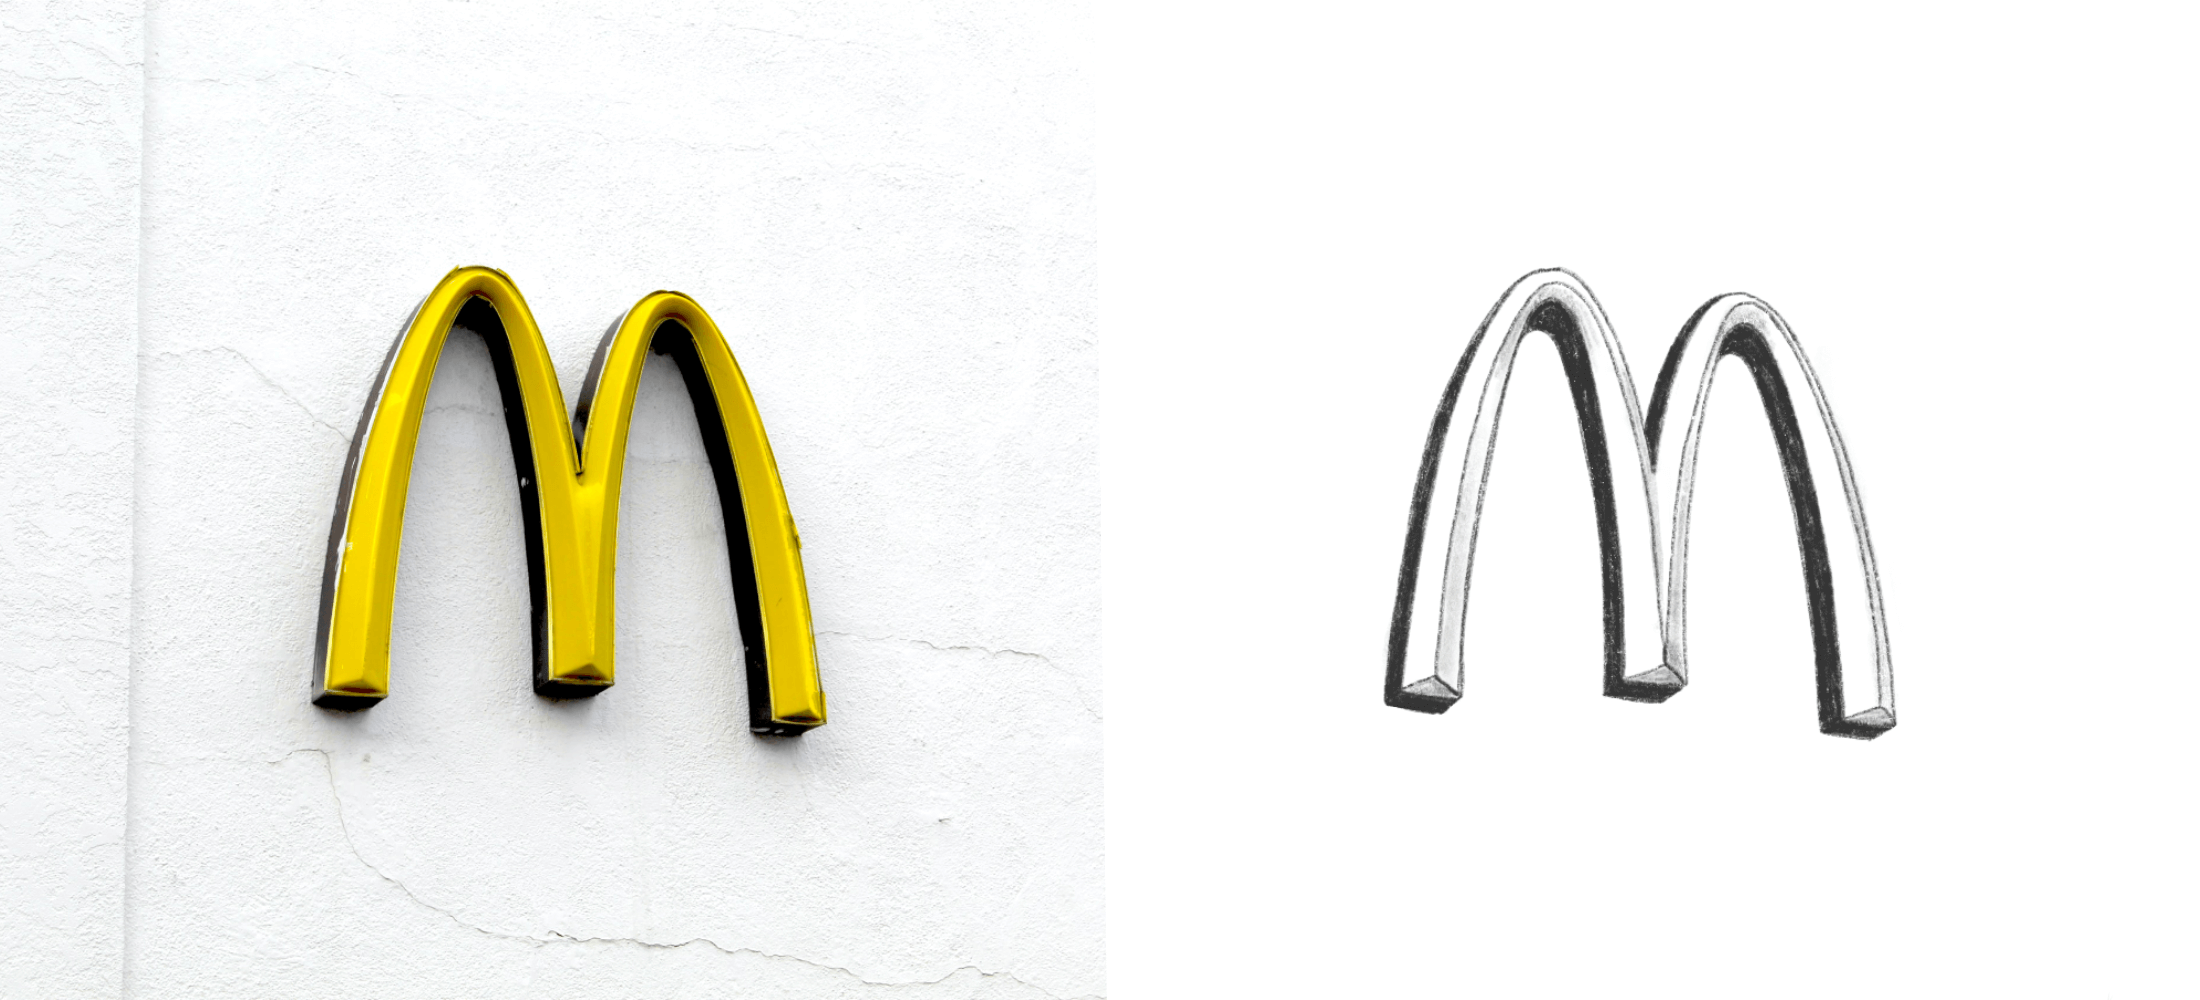 A 3D model of the McDonald's logo mounted on the wall of a McDonald's restaurant alongside a drawn version of the McDonald's logo